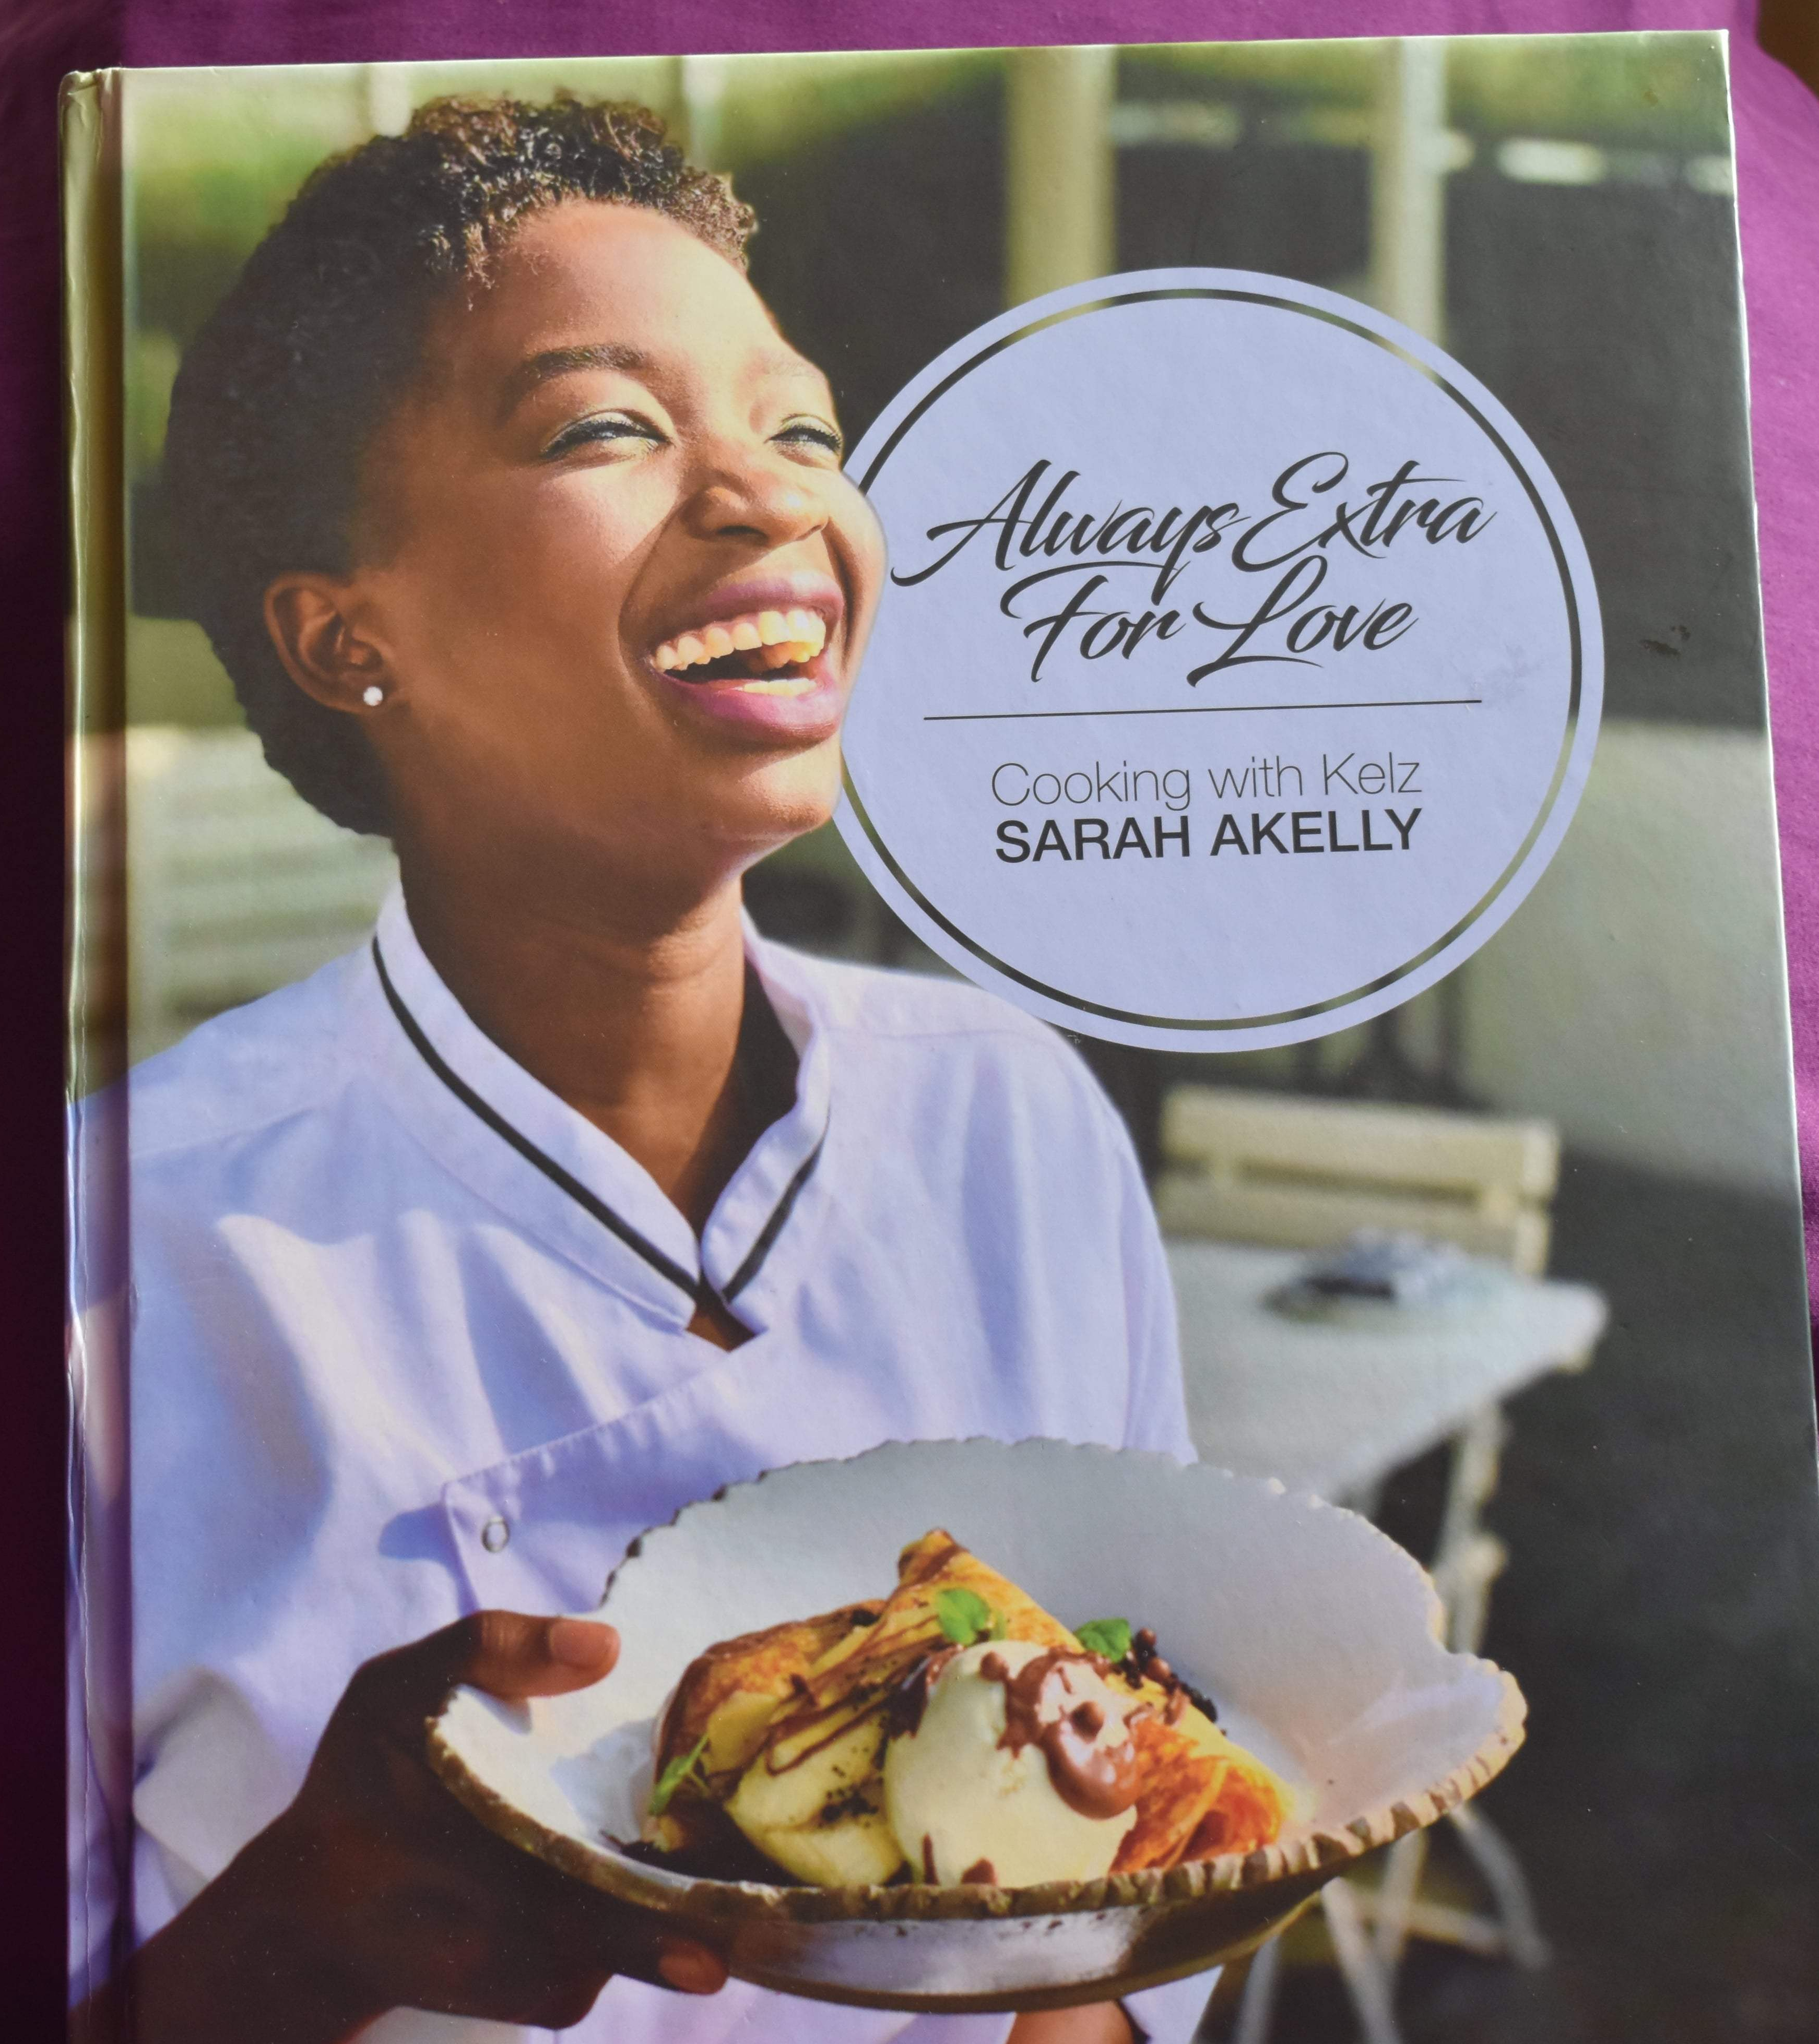 cook book cover, always extra for love cook book, Sarah Akelly, Ugandan cookbook